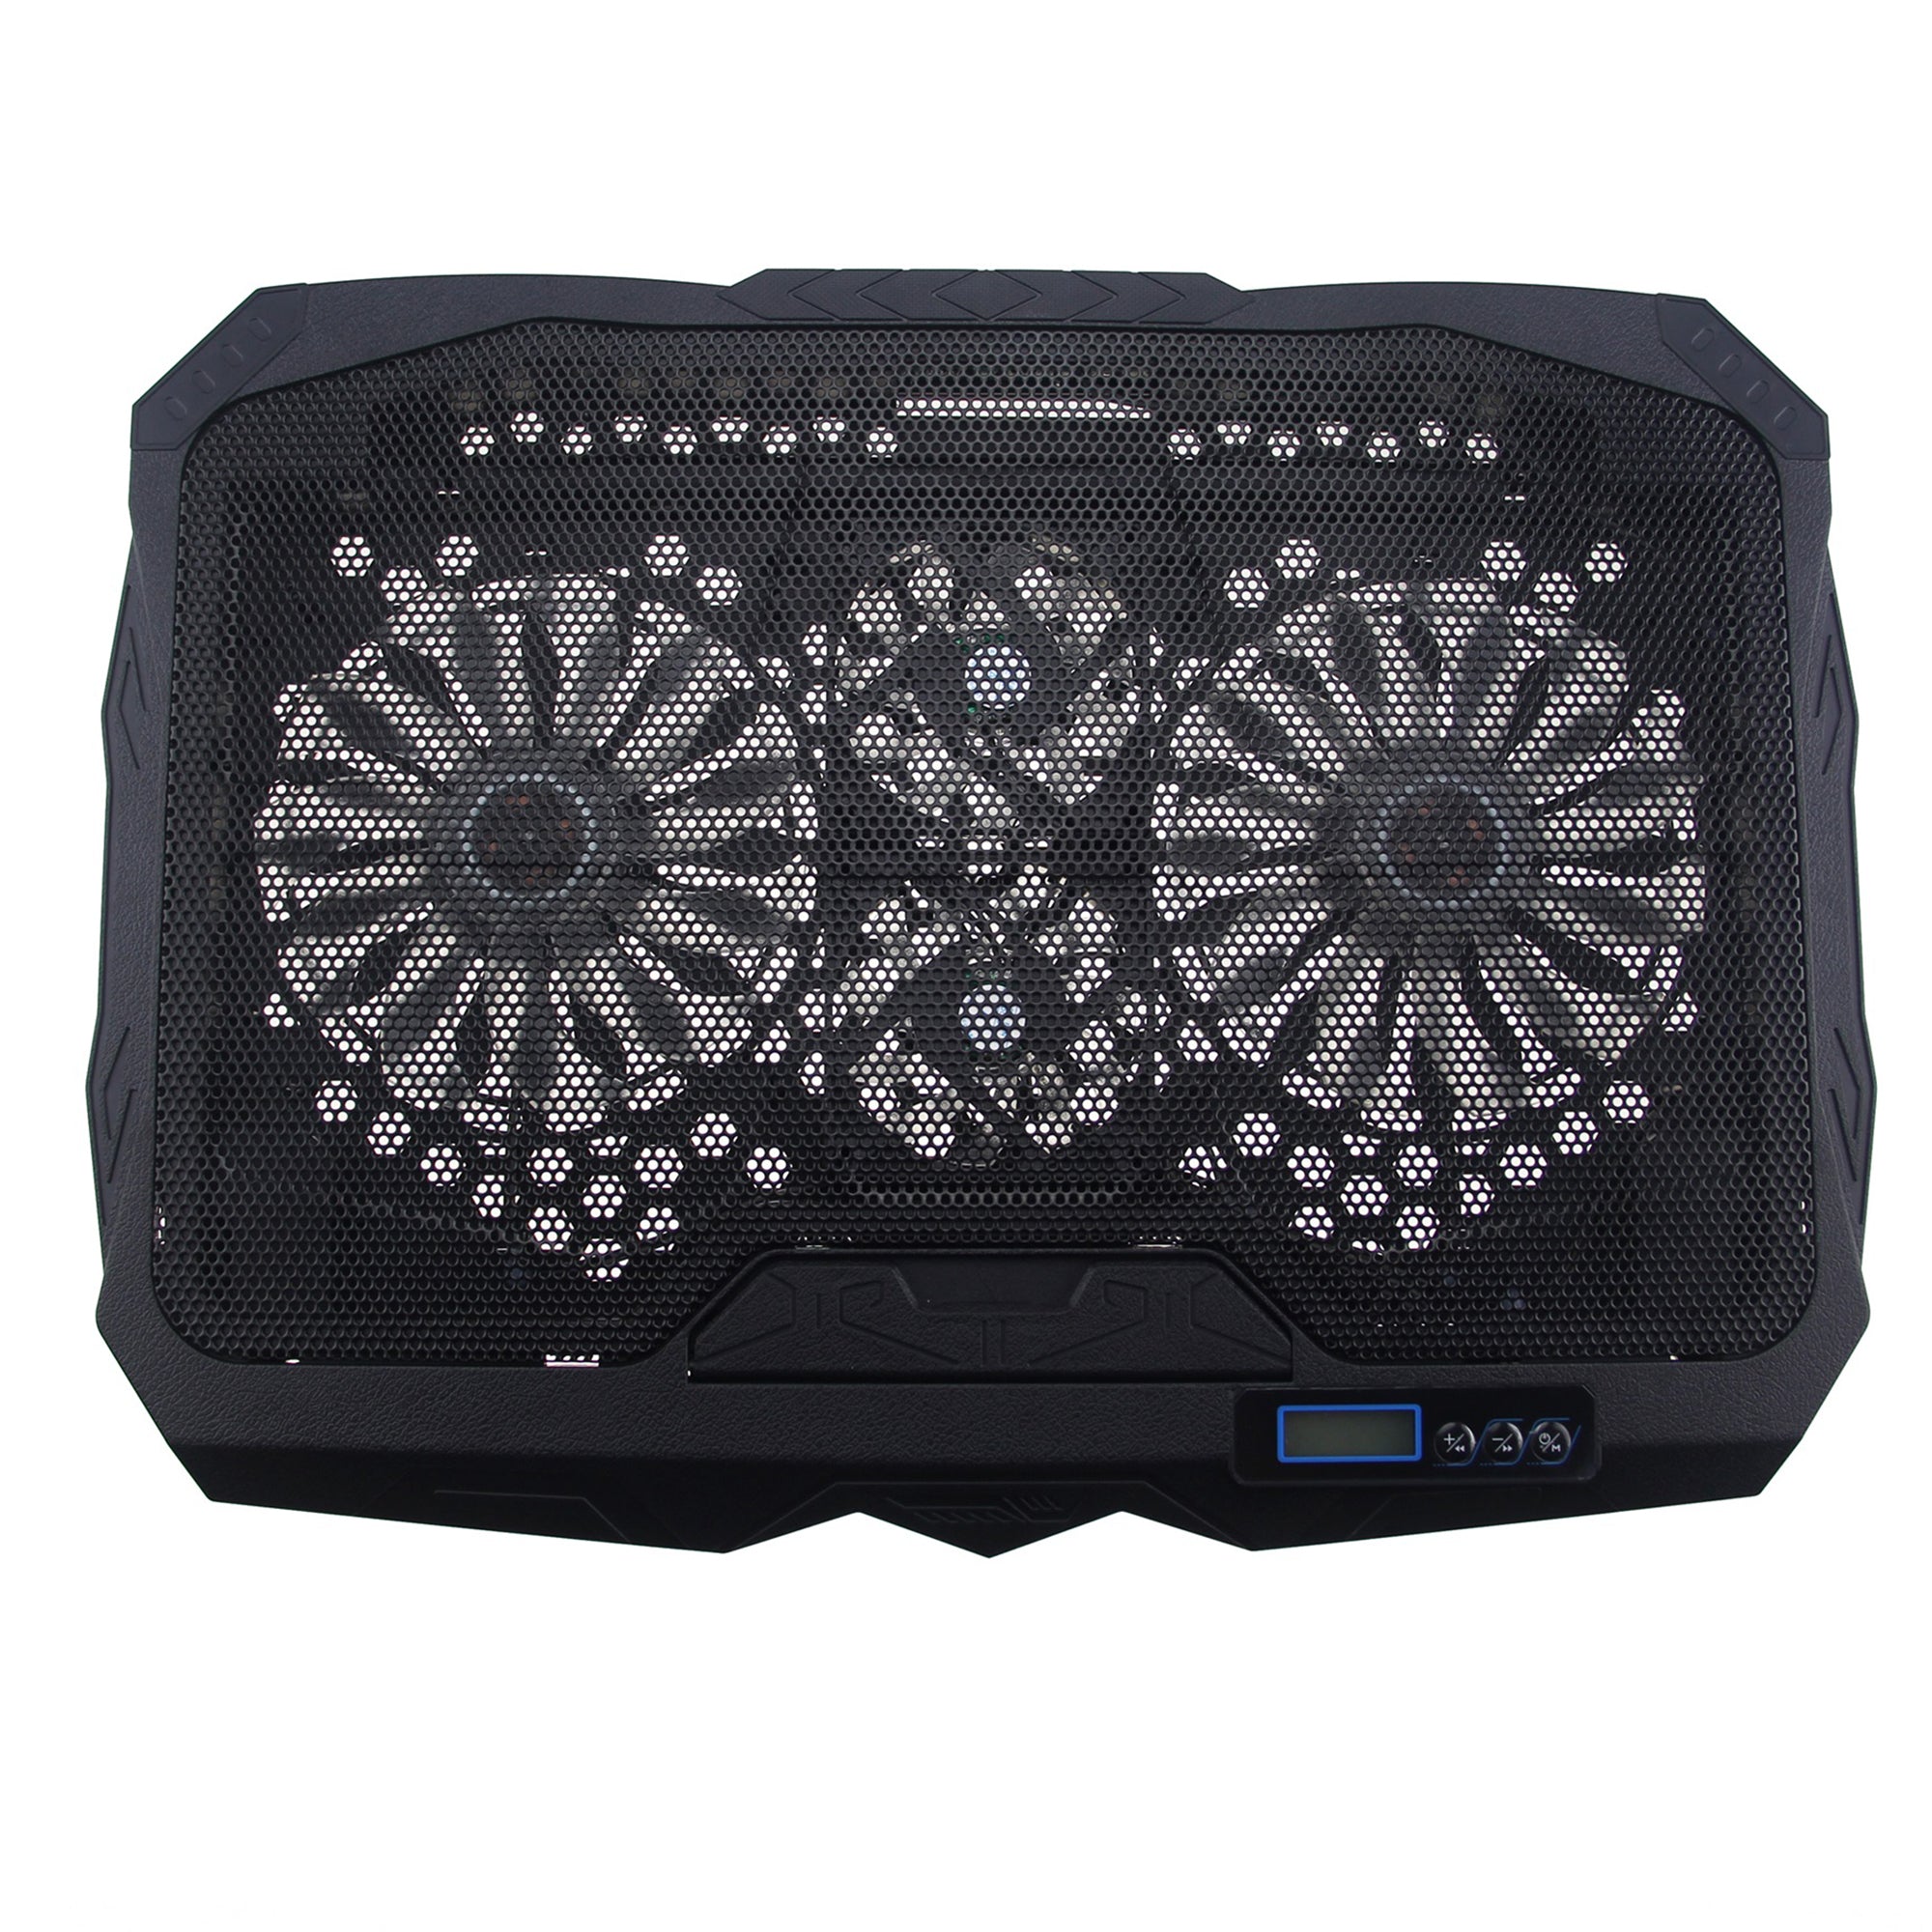 S18 Notebook Router 4-Fan Cooler Radiator Adjustable Wind Speed Laptop Cooling Pad with Display Screen - Blue Light